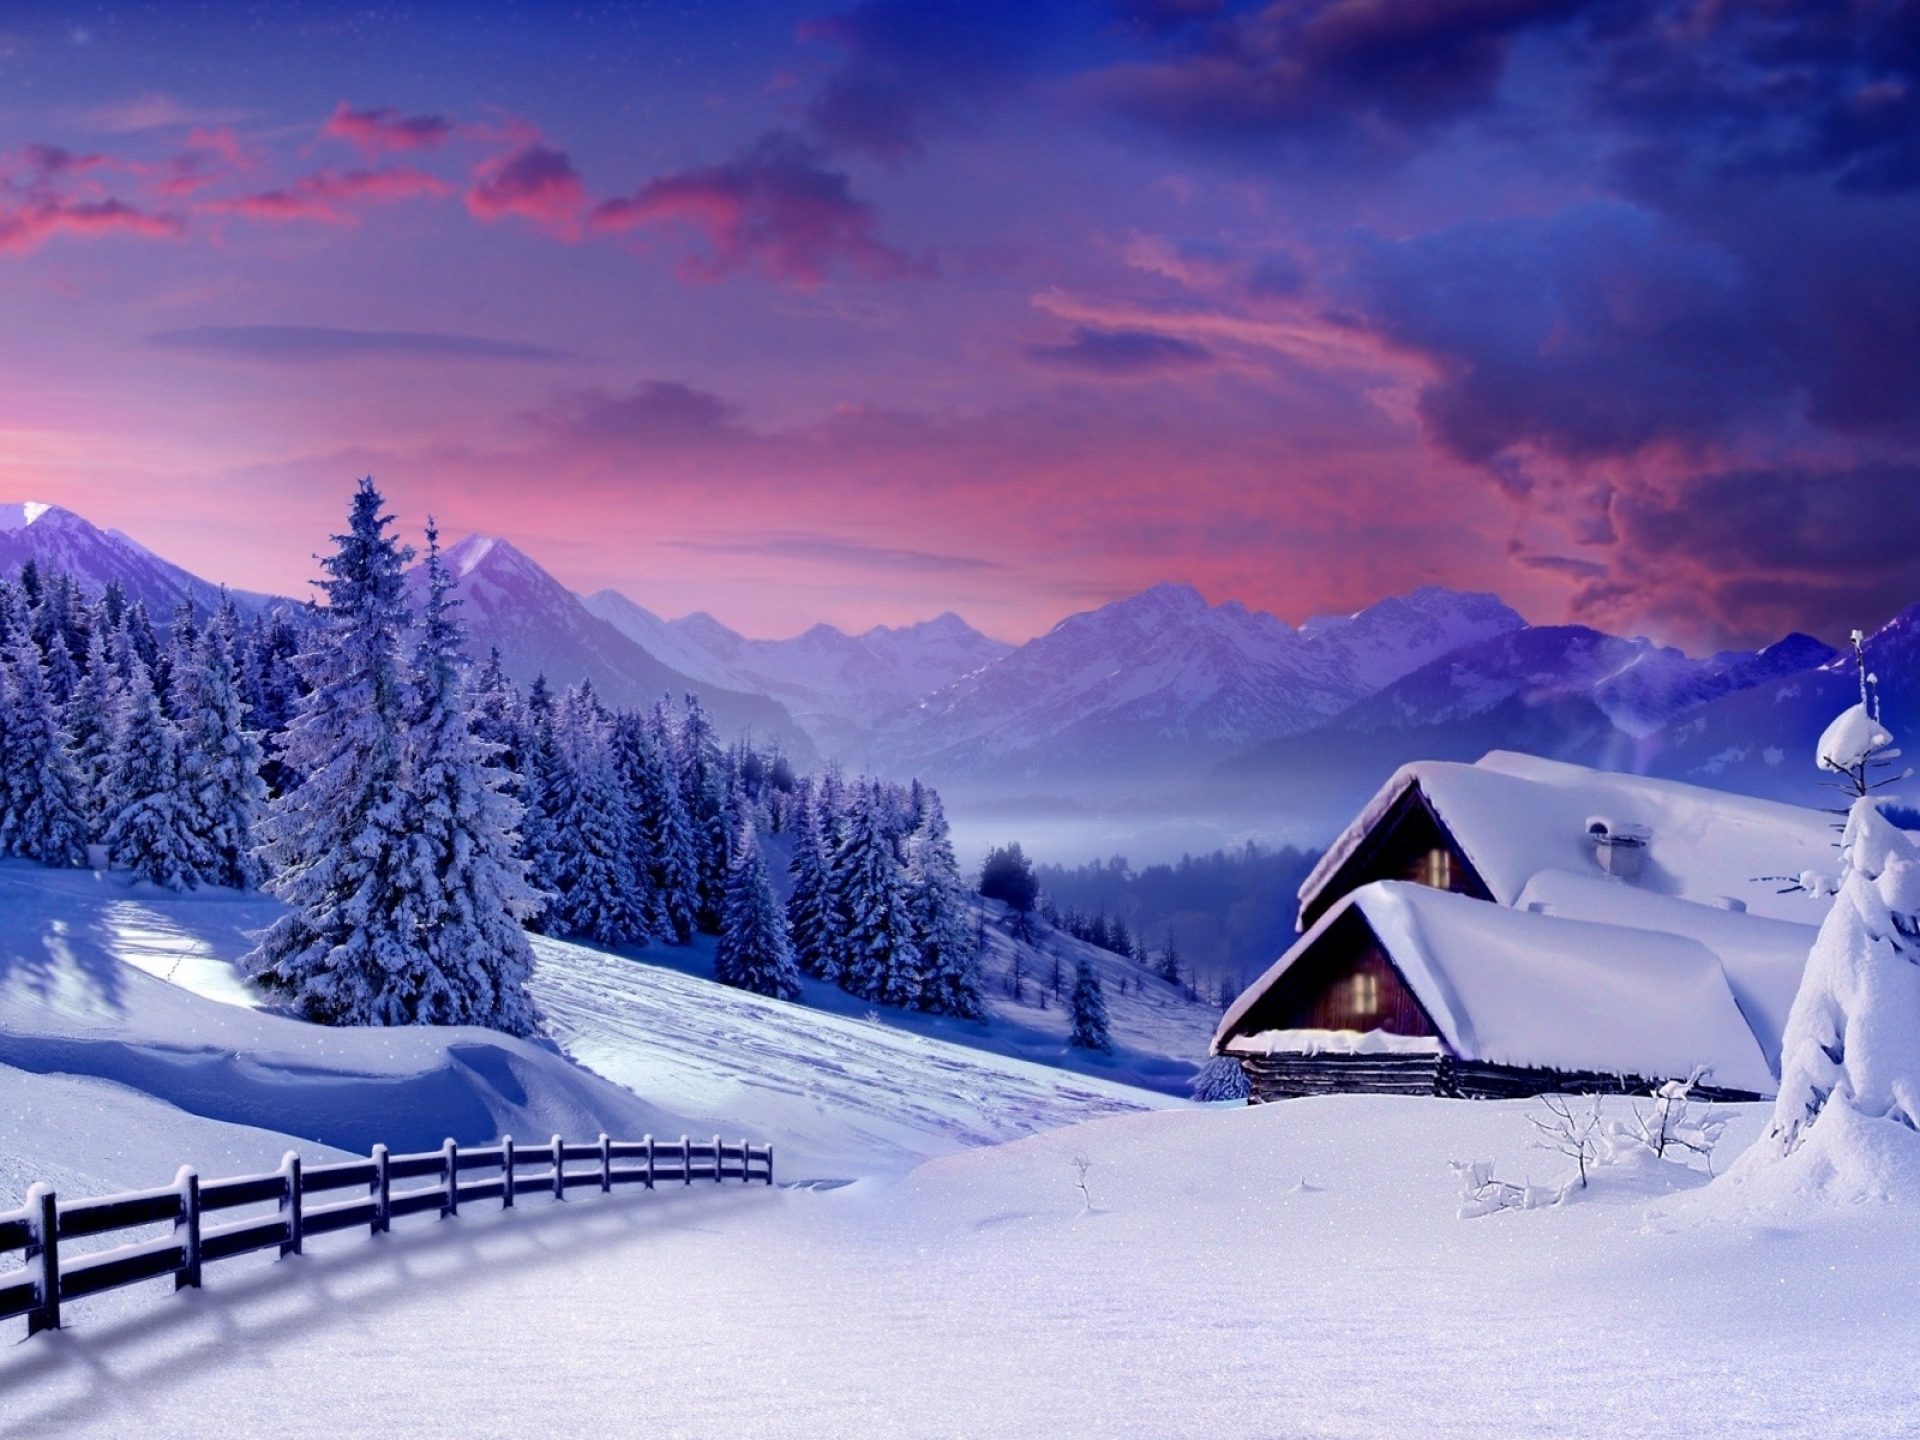 Winter Landscape Snowy Mountains Village Houses Covered With Snow Wooden Fence Forest With Christmas Trees HD Wallpaper 3840x2400, Wallpaper13.com